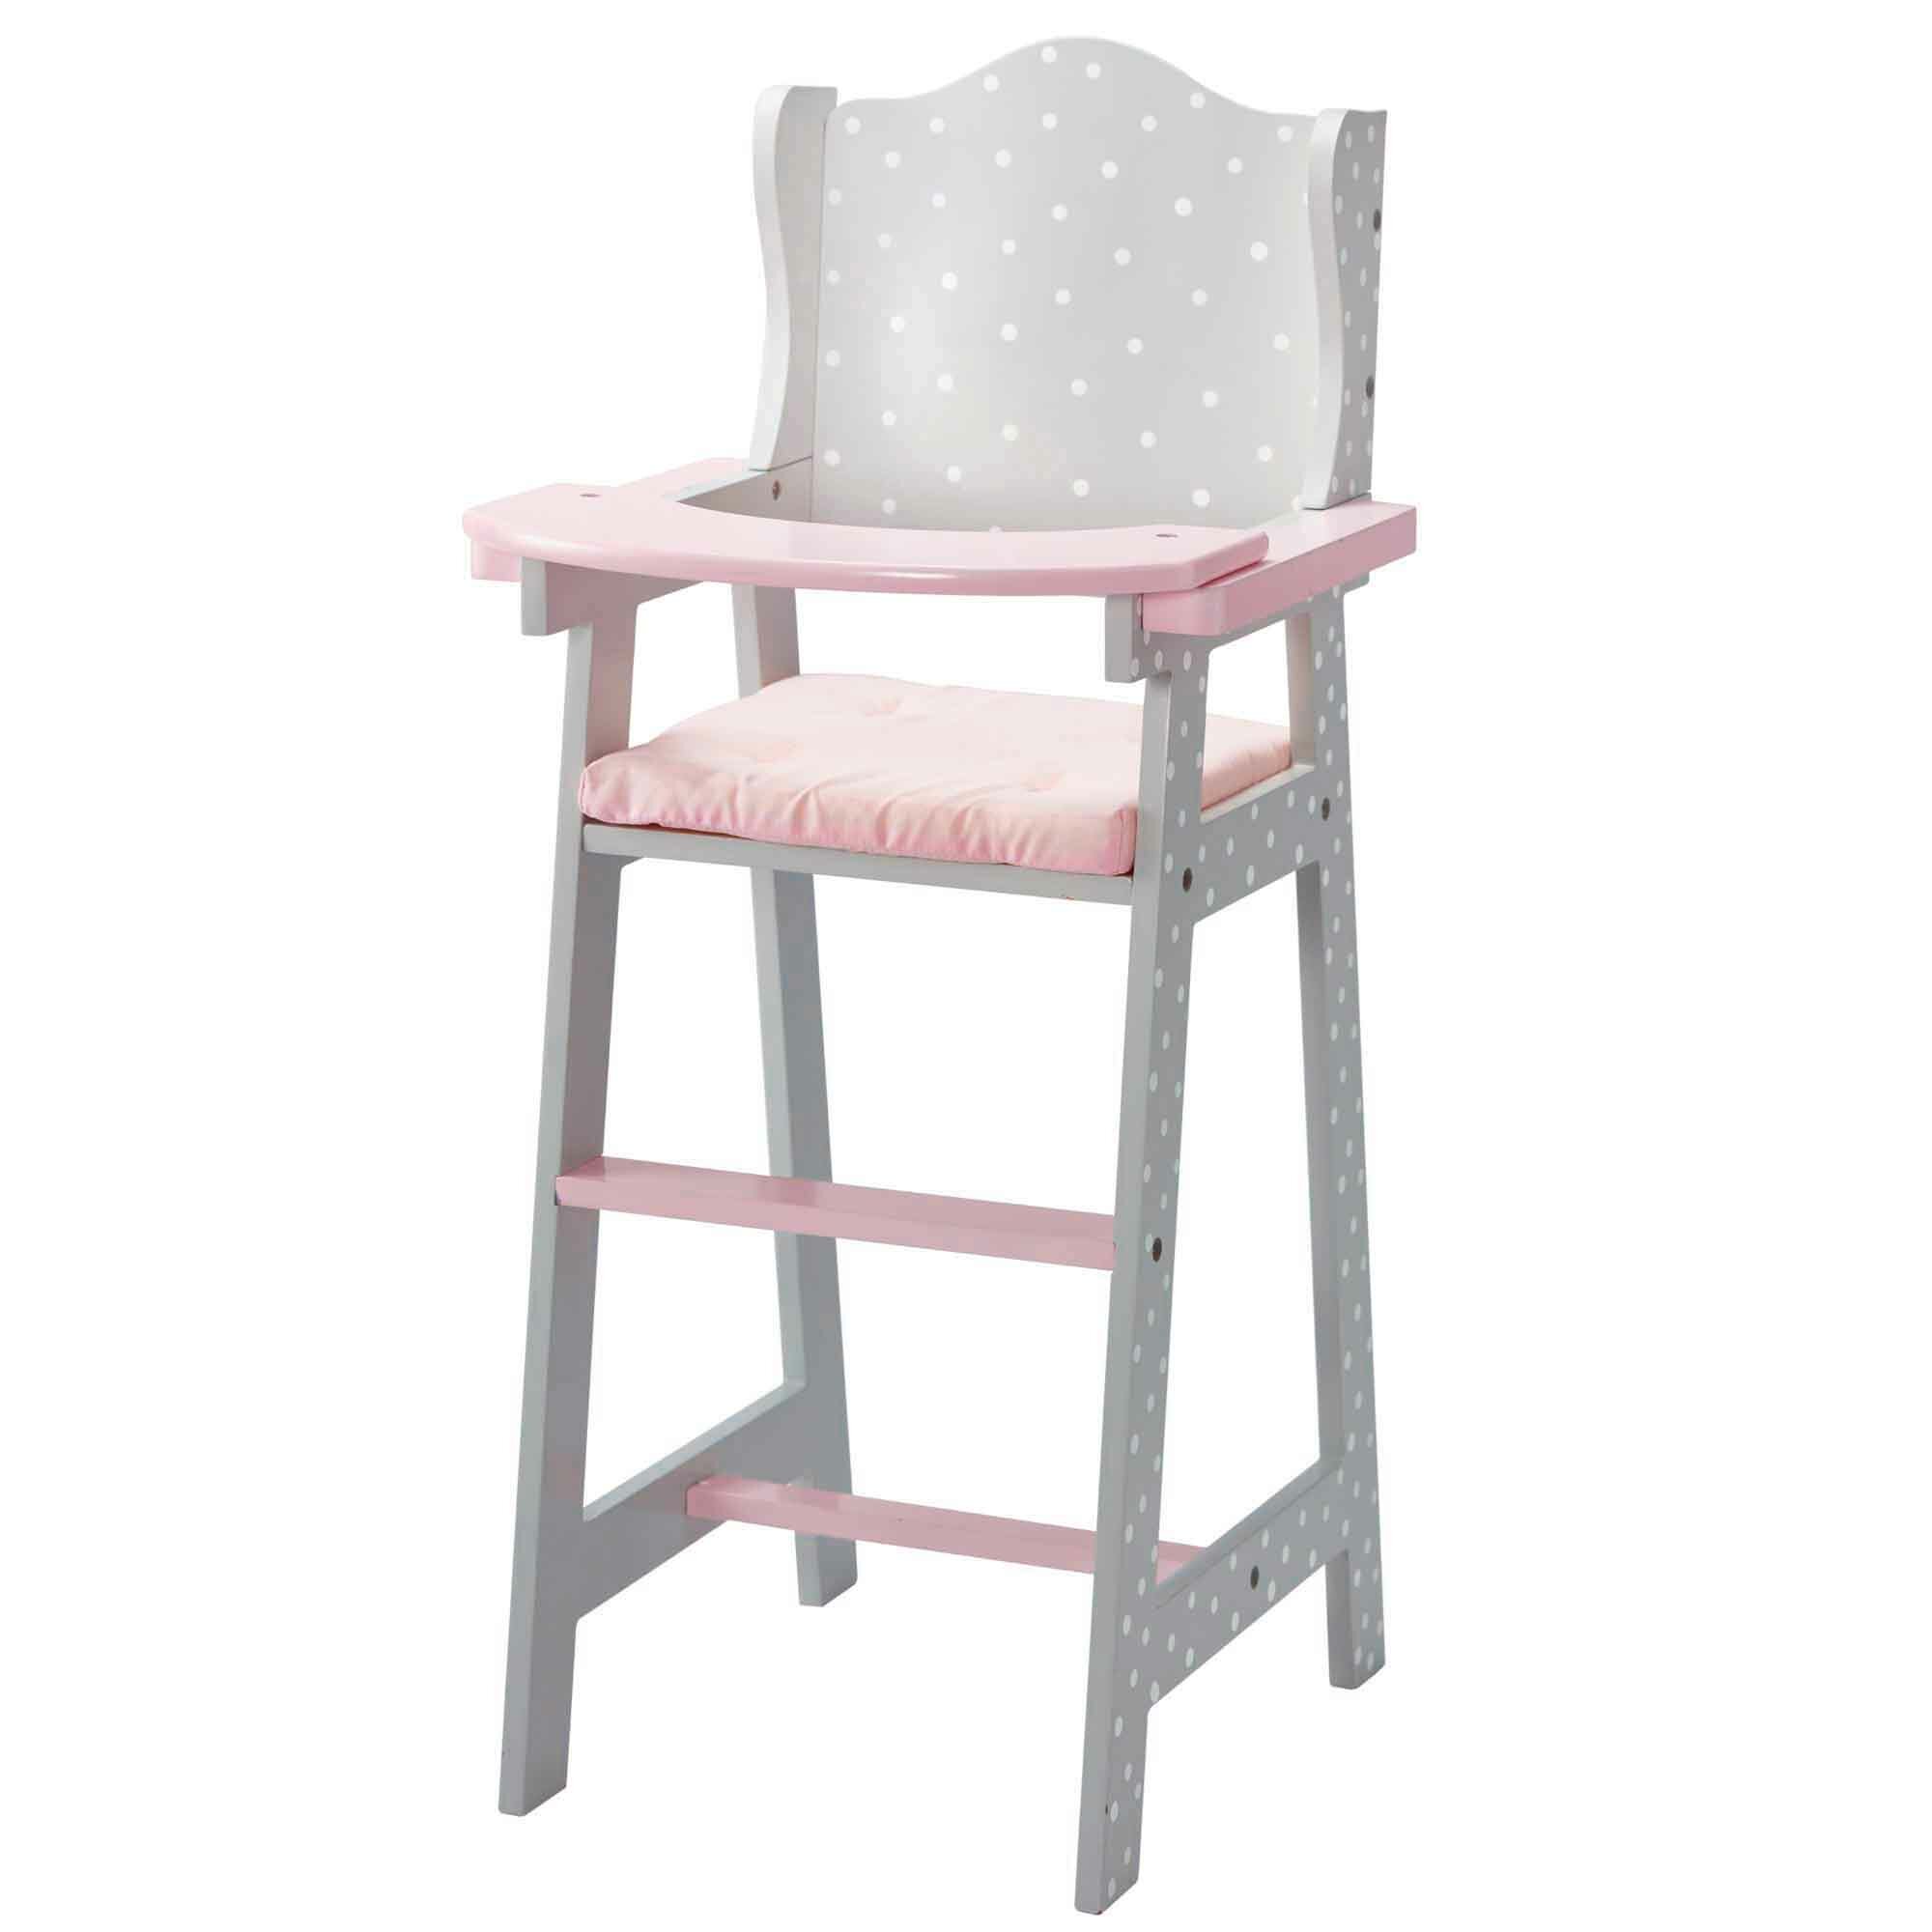 highchair-pad-deluxe-sweety